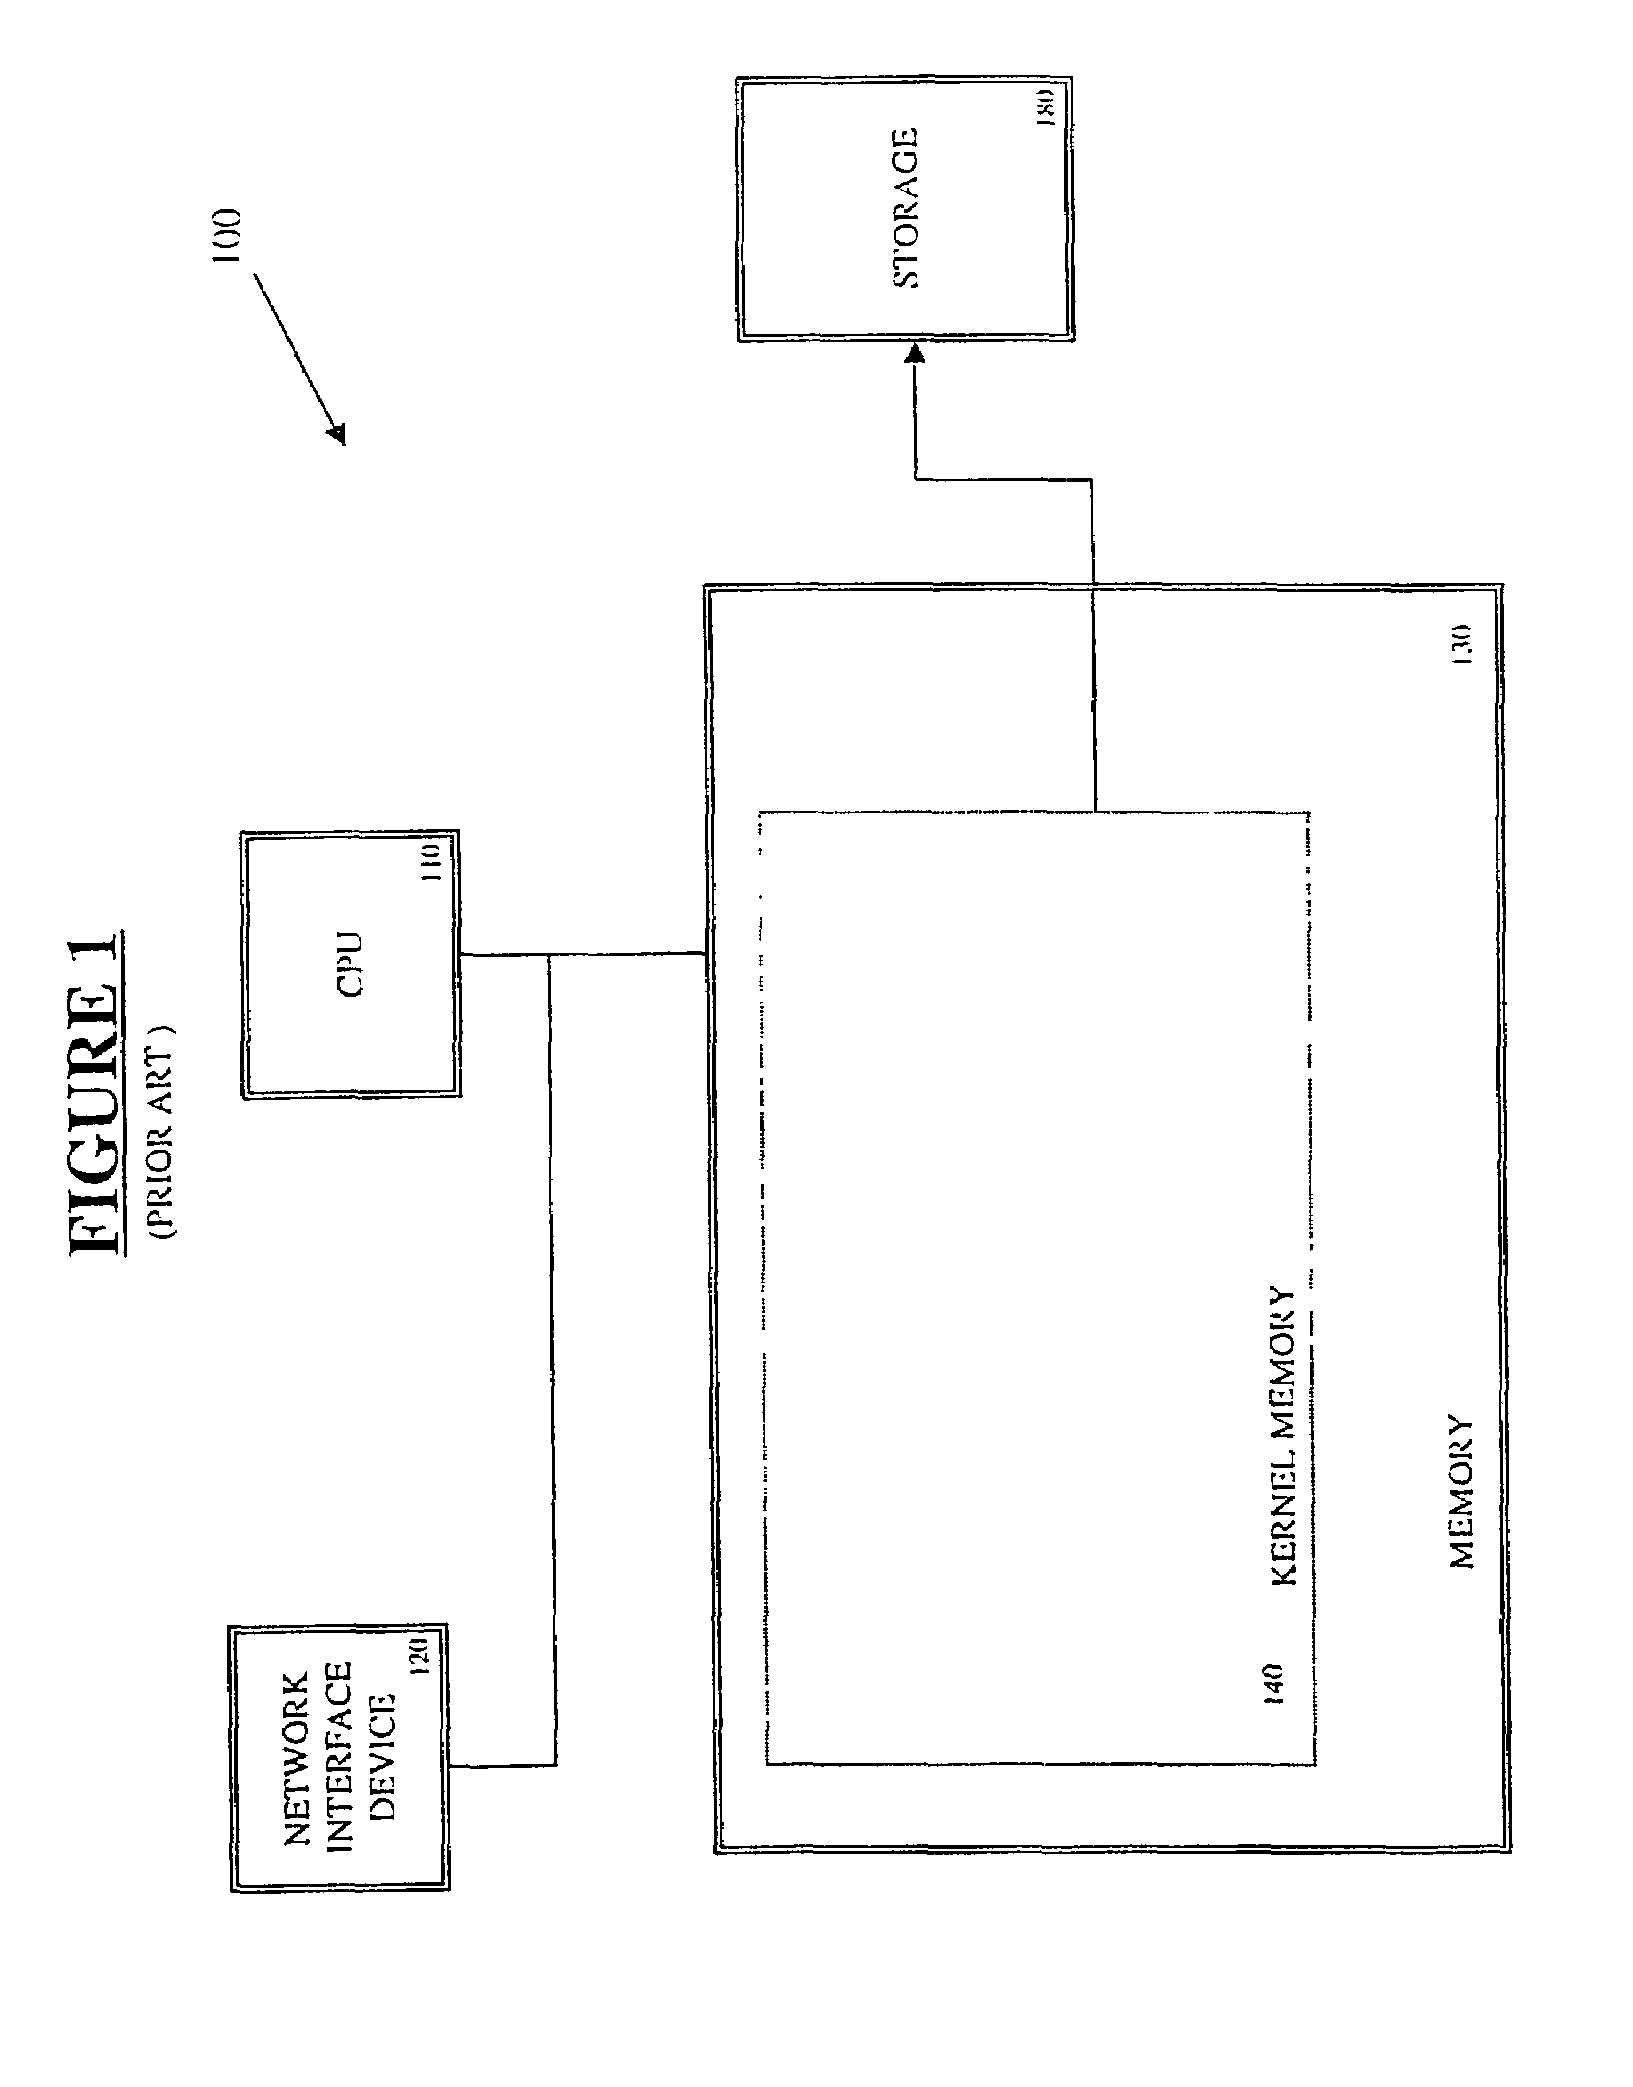 System and method for an efficient transport layer transmit interface